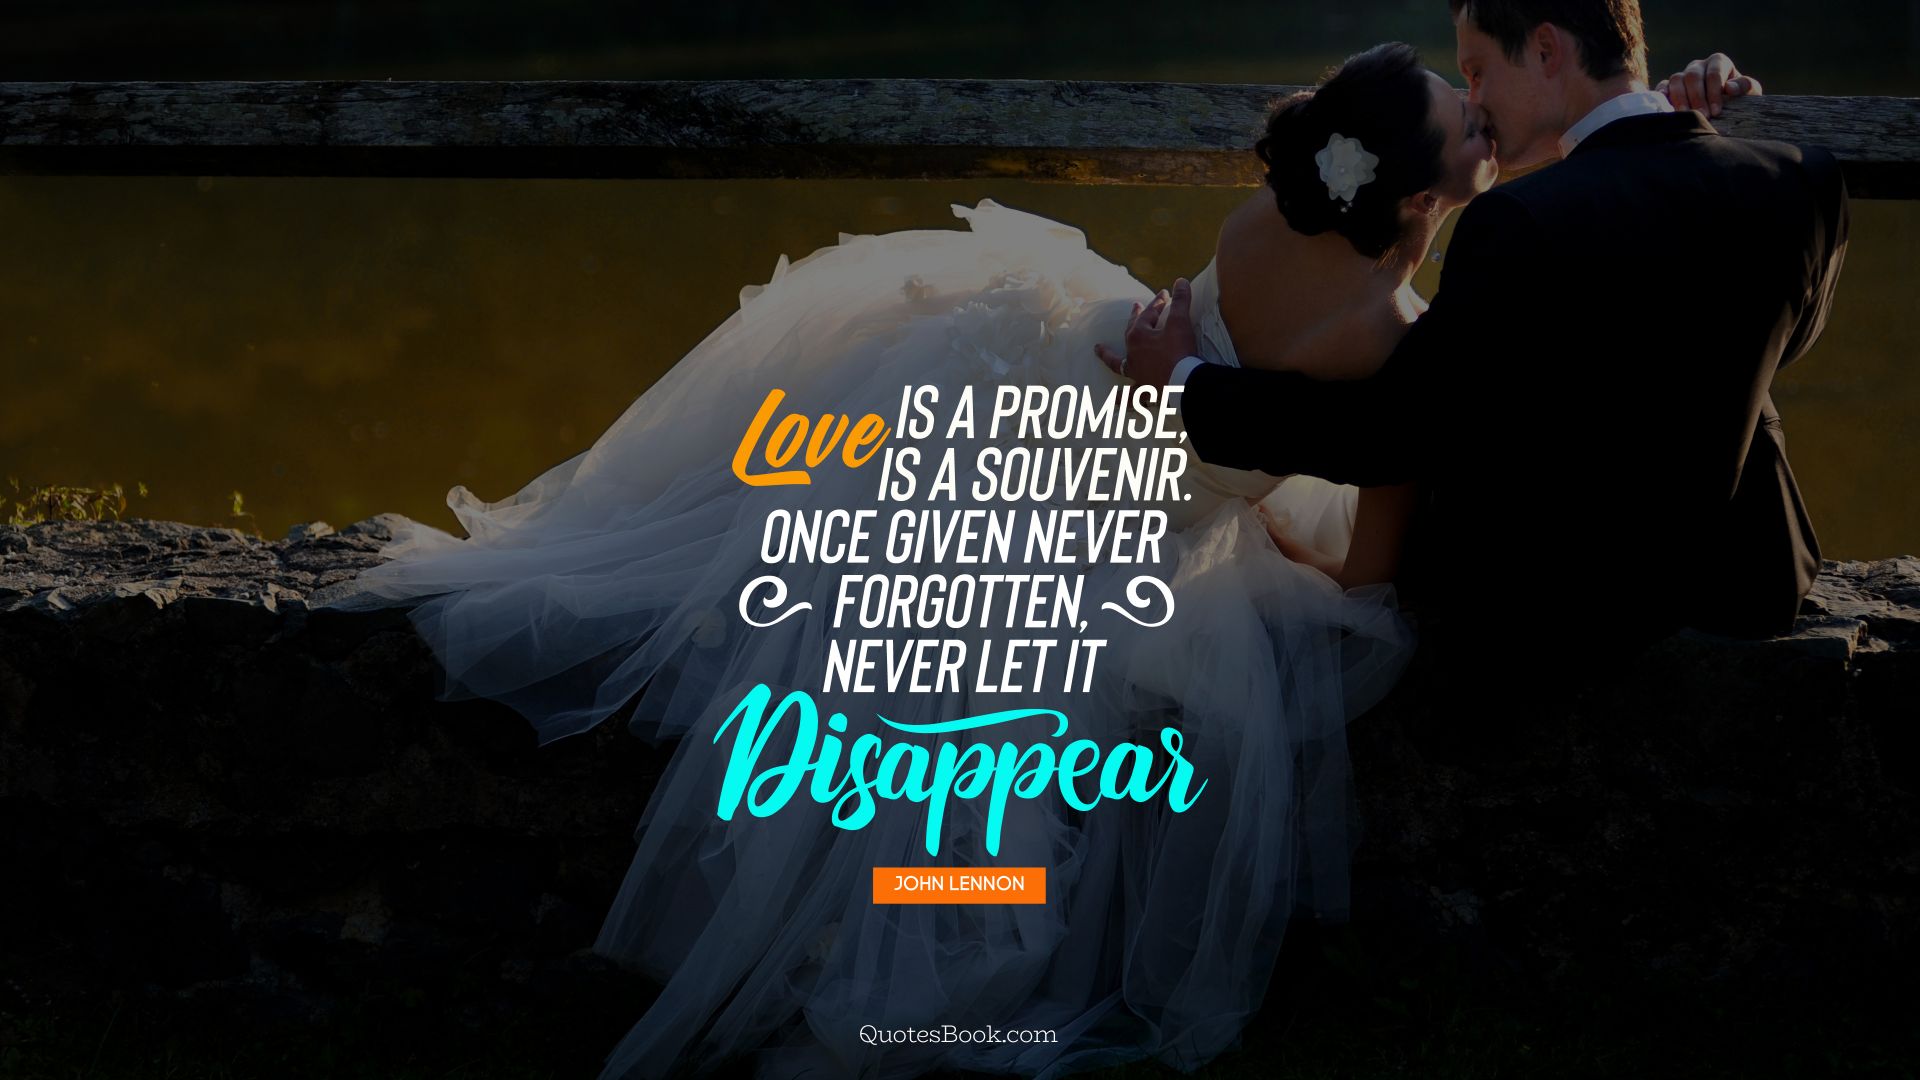 Love is a promise, love is a souvenir. Once given never forgotten,never let it disappear. - Quote by John Lennon